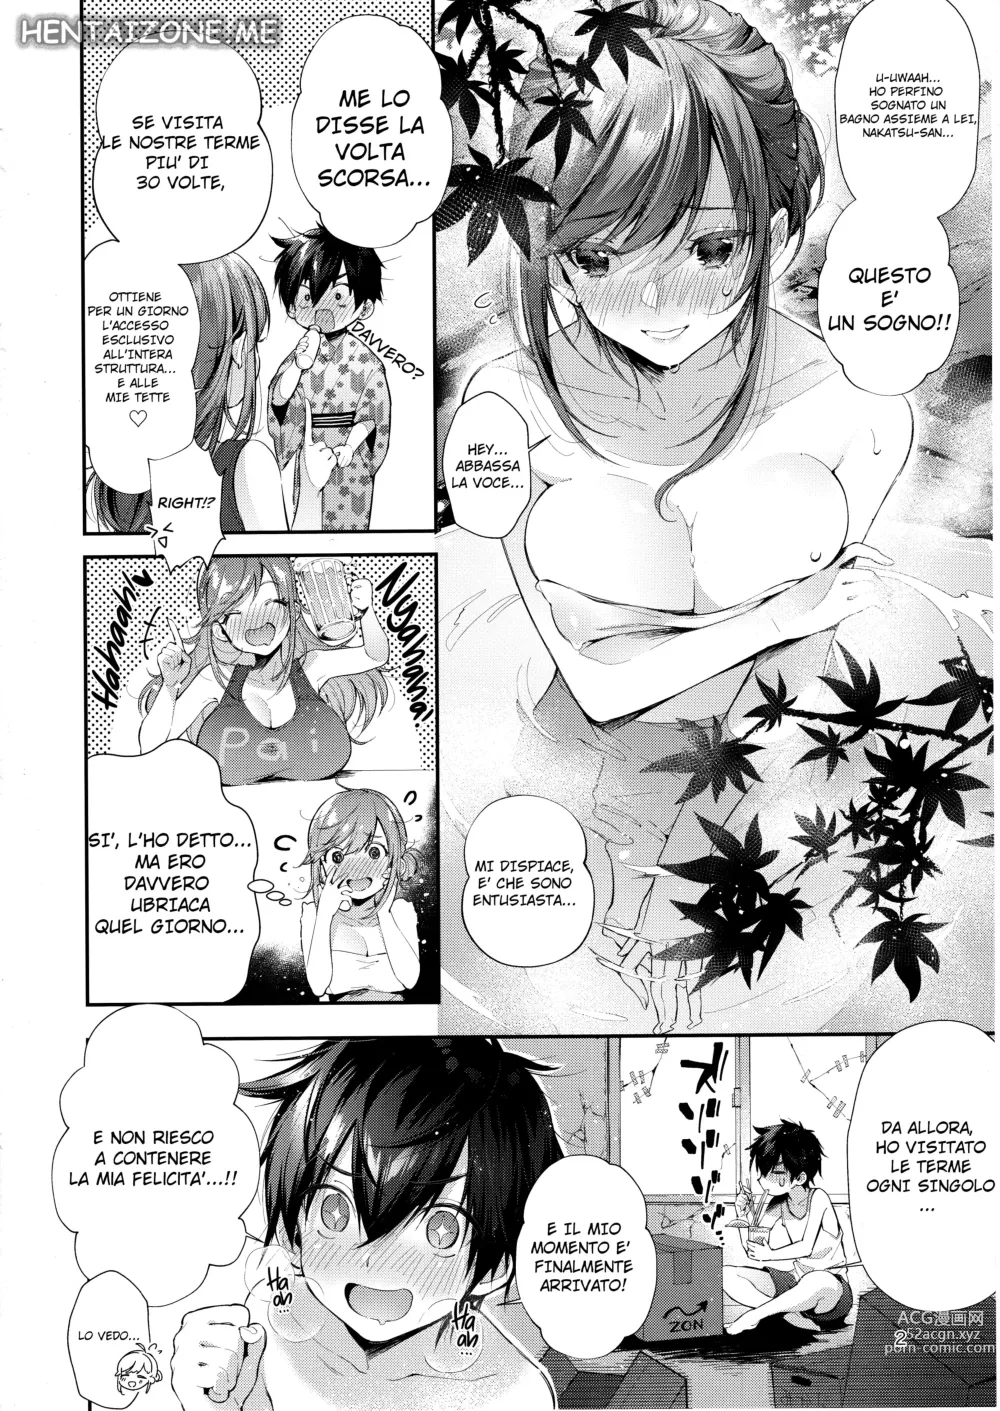 Page 5 of doujinshi Terme Speciali